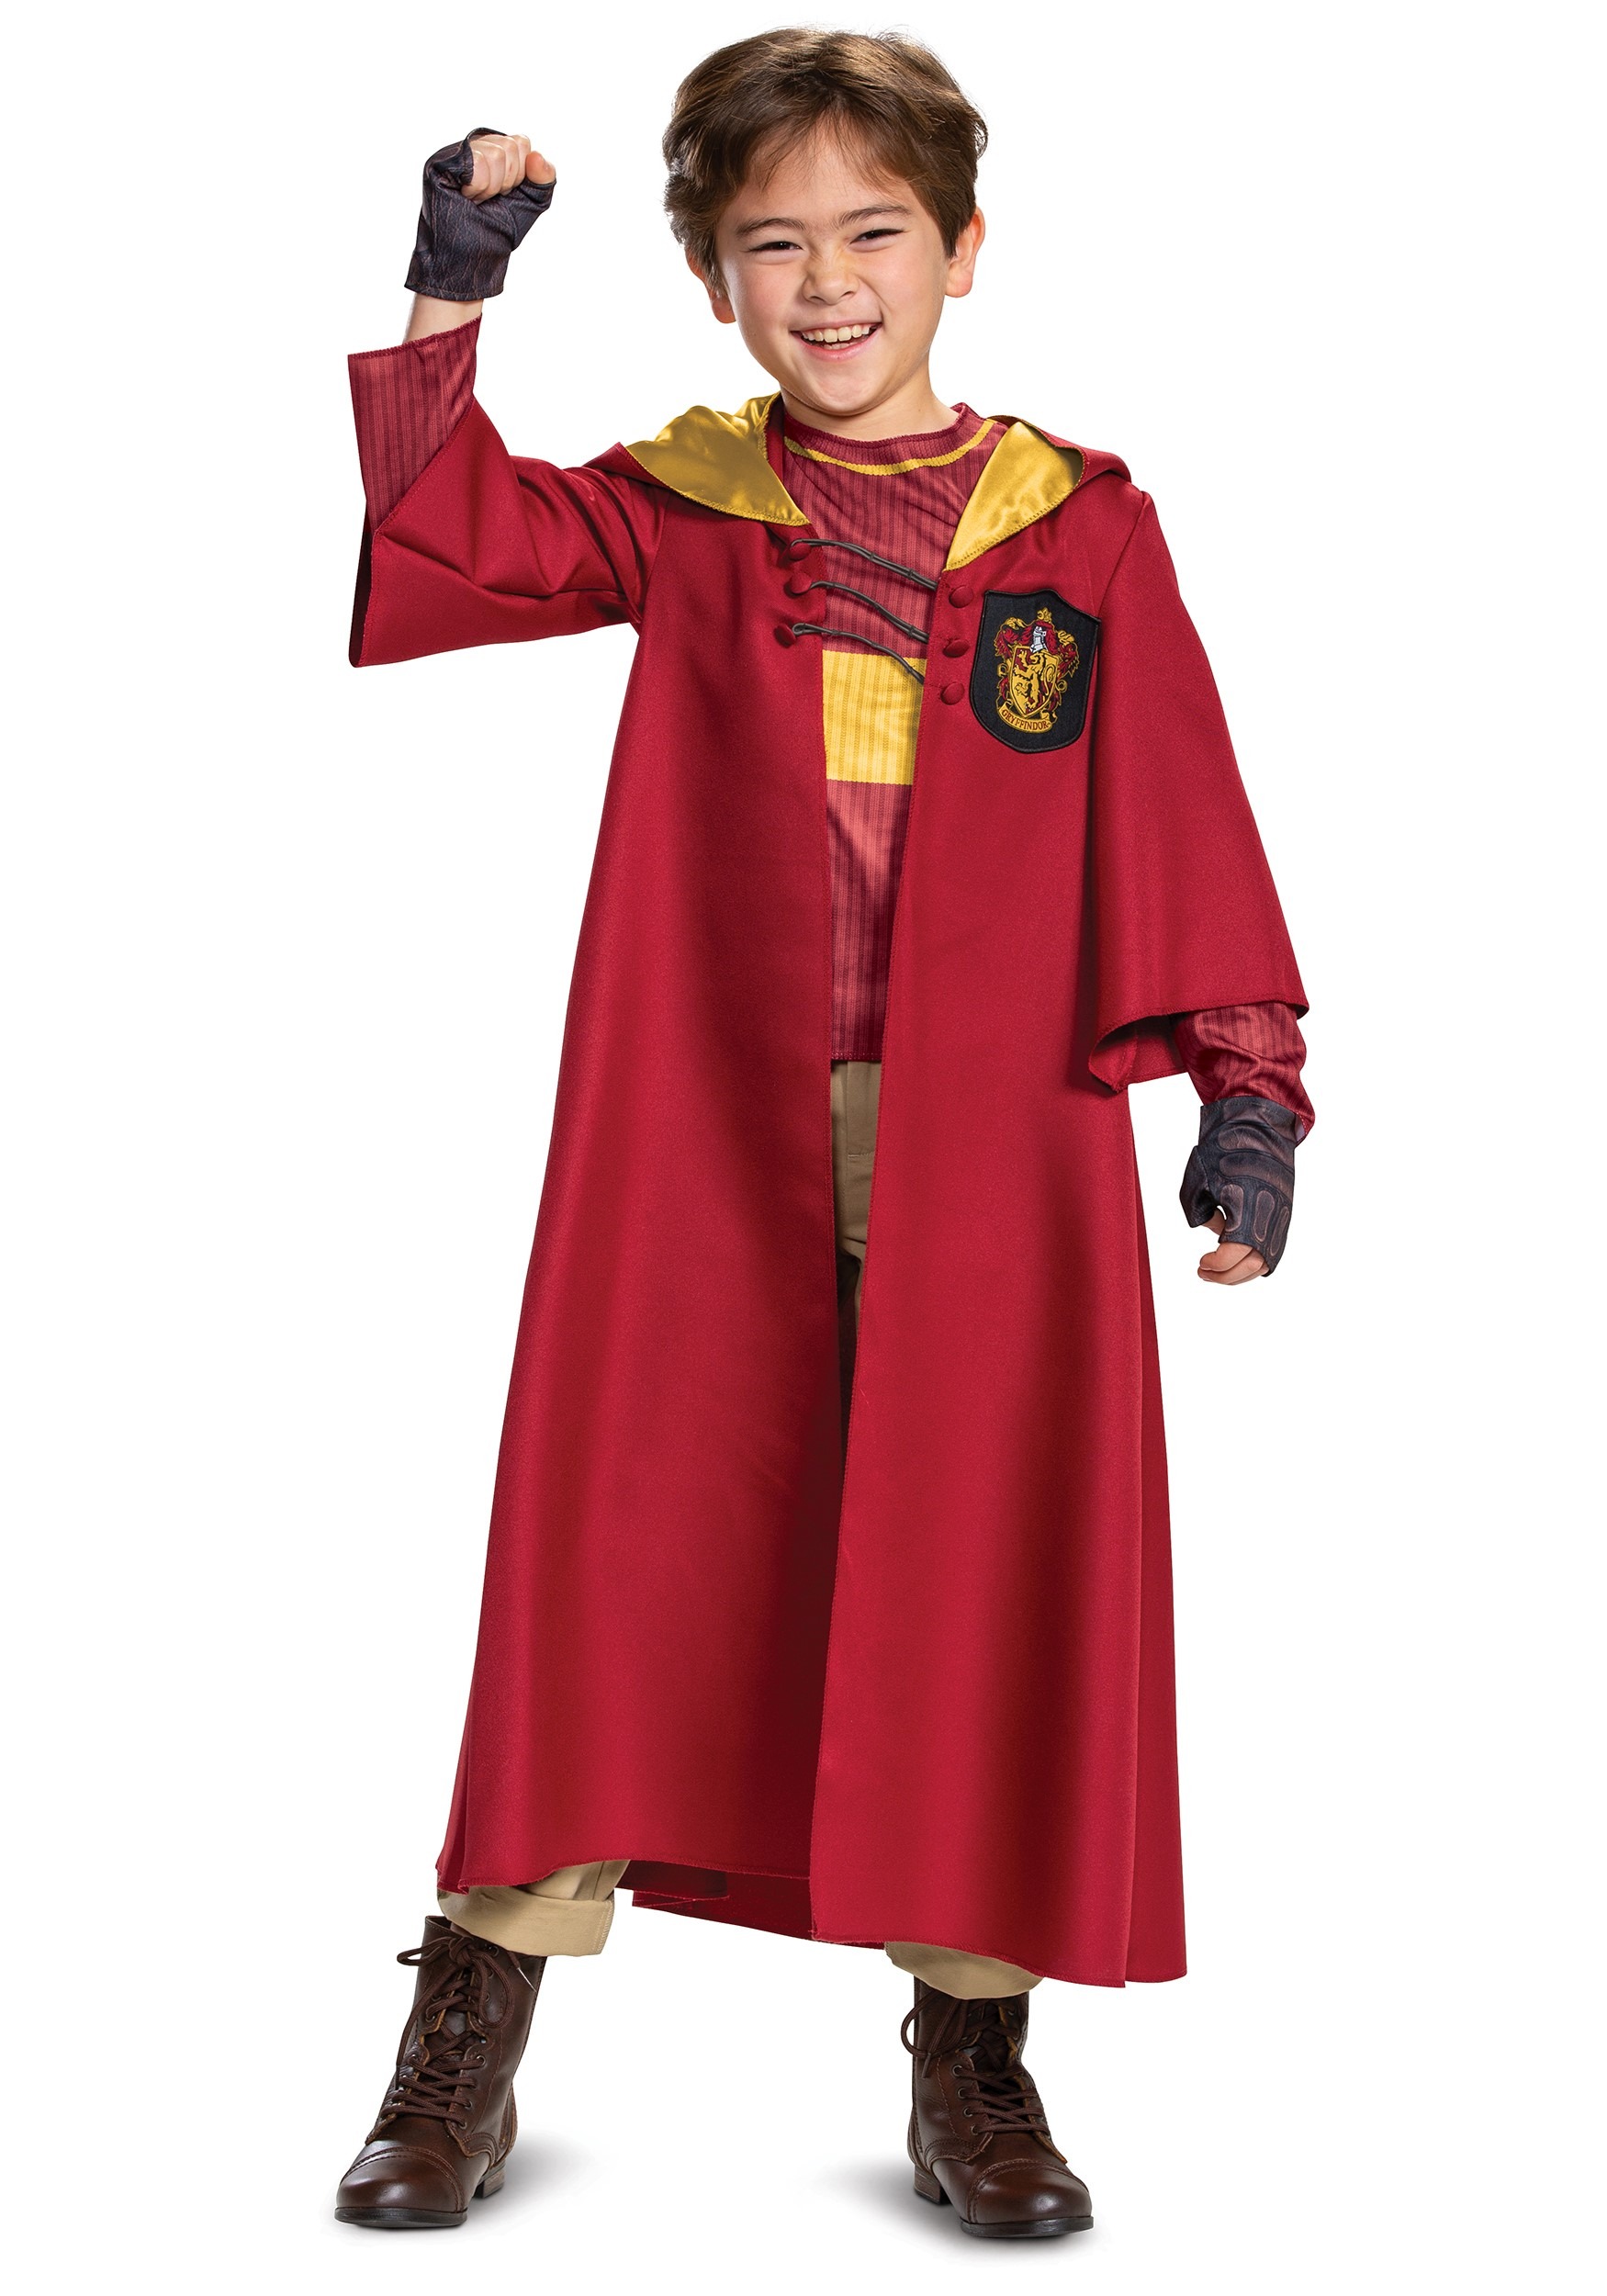 Photos - Fancy Dress Potter Disguise Harry  Deluxe Gryffindor Quidditch Robe Costume For Kids Re 